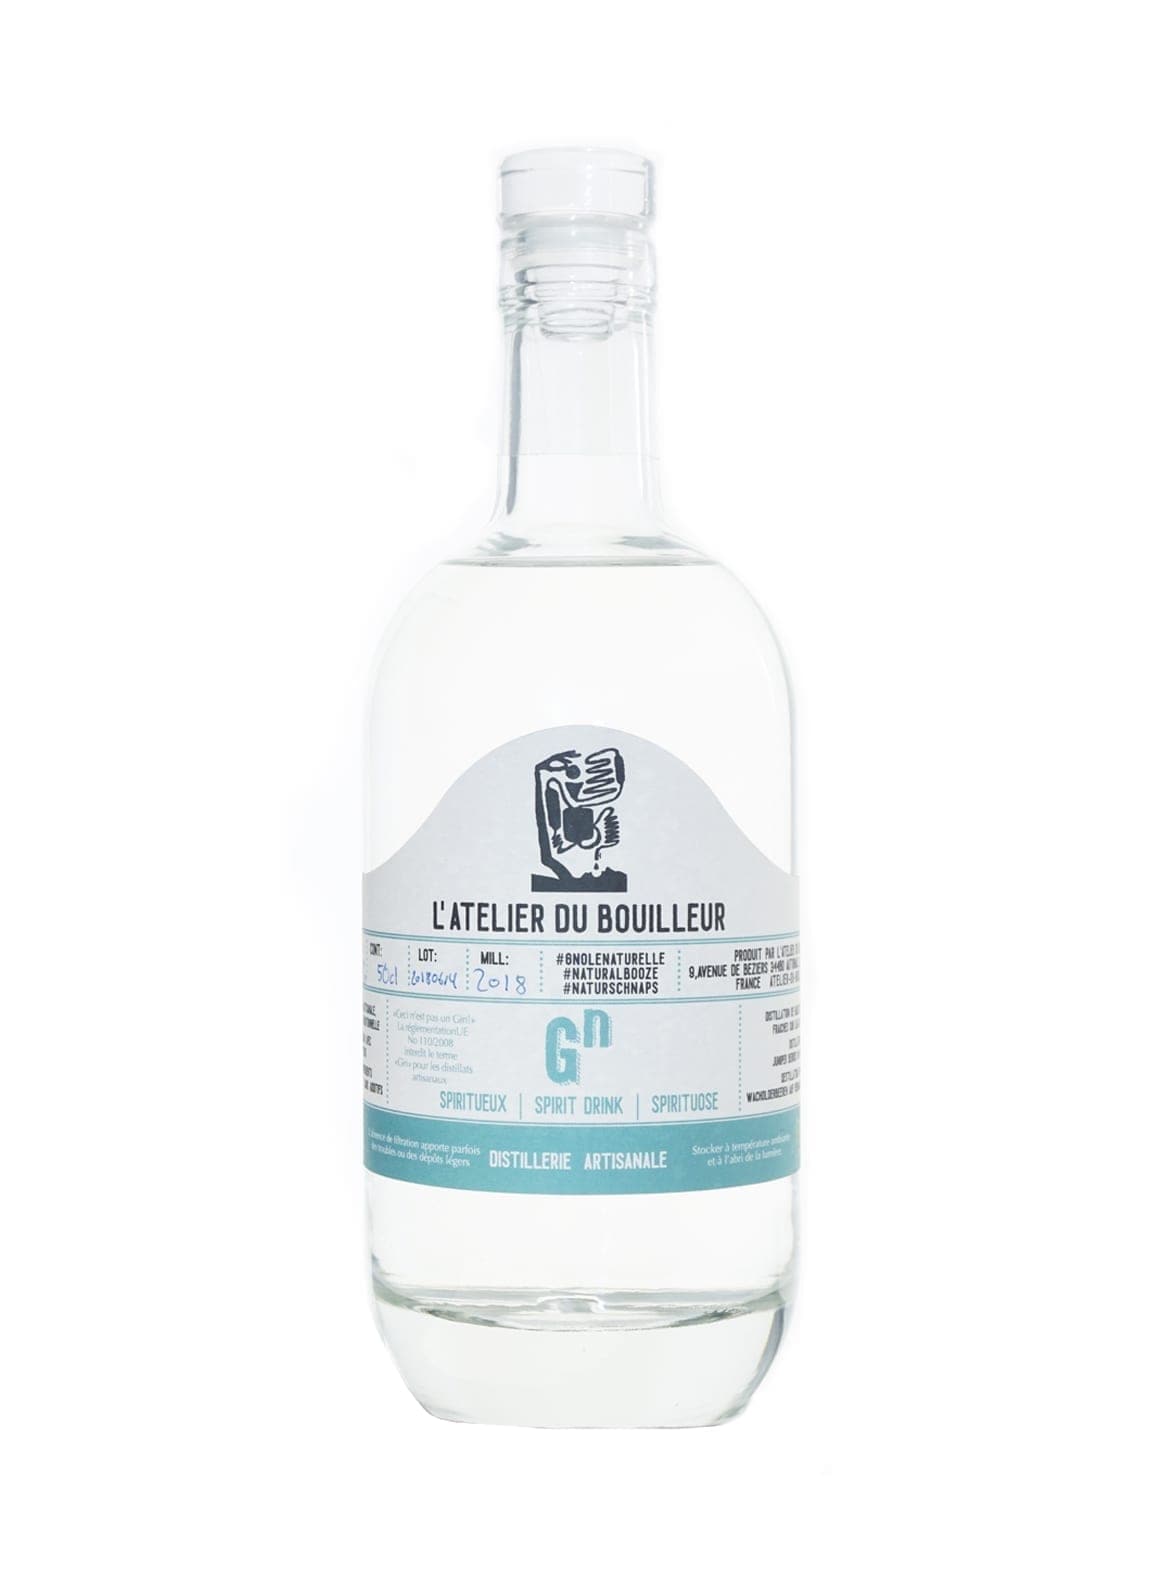 Bouilleur Le Gin 40% 500ml | Gin | Shop online at Spirits of France